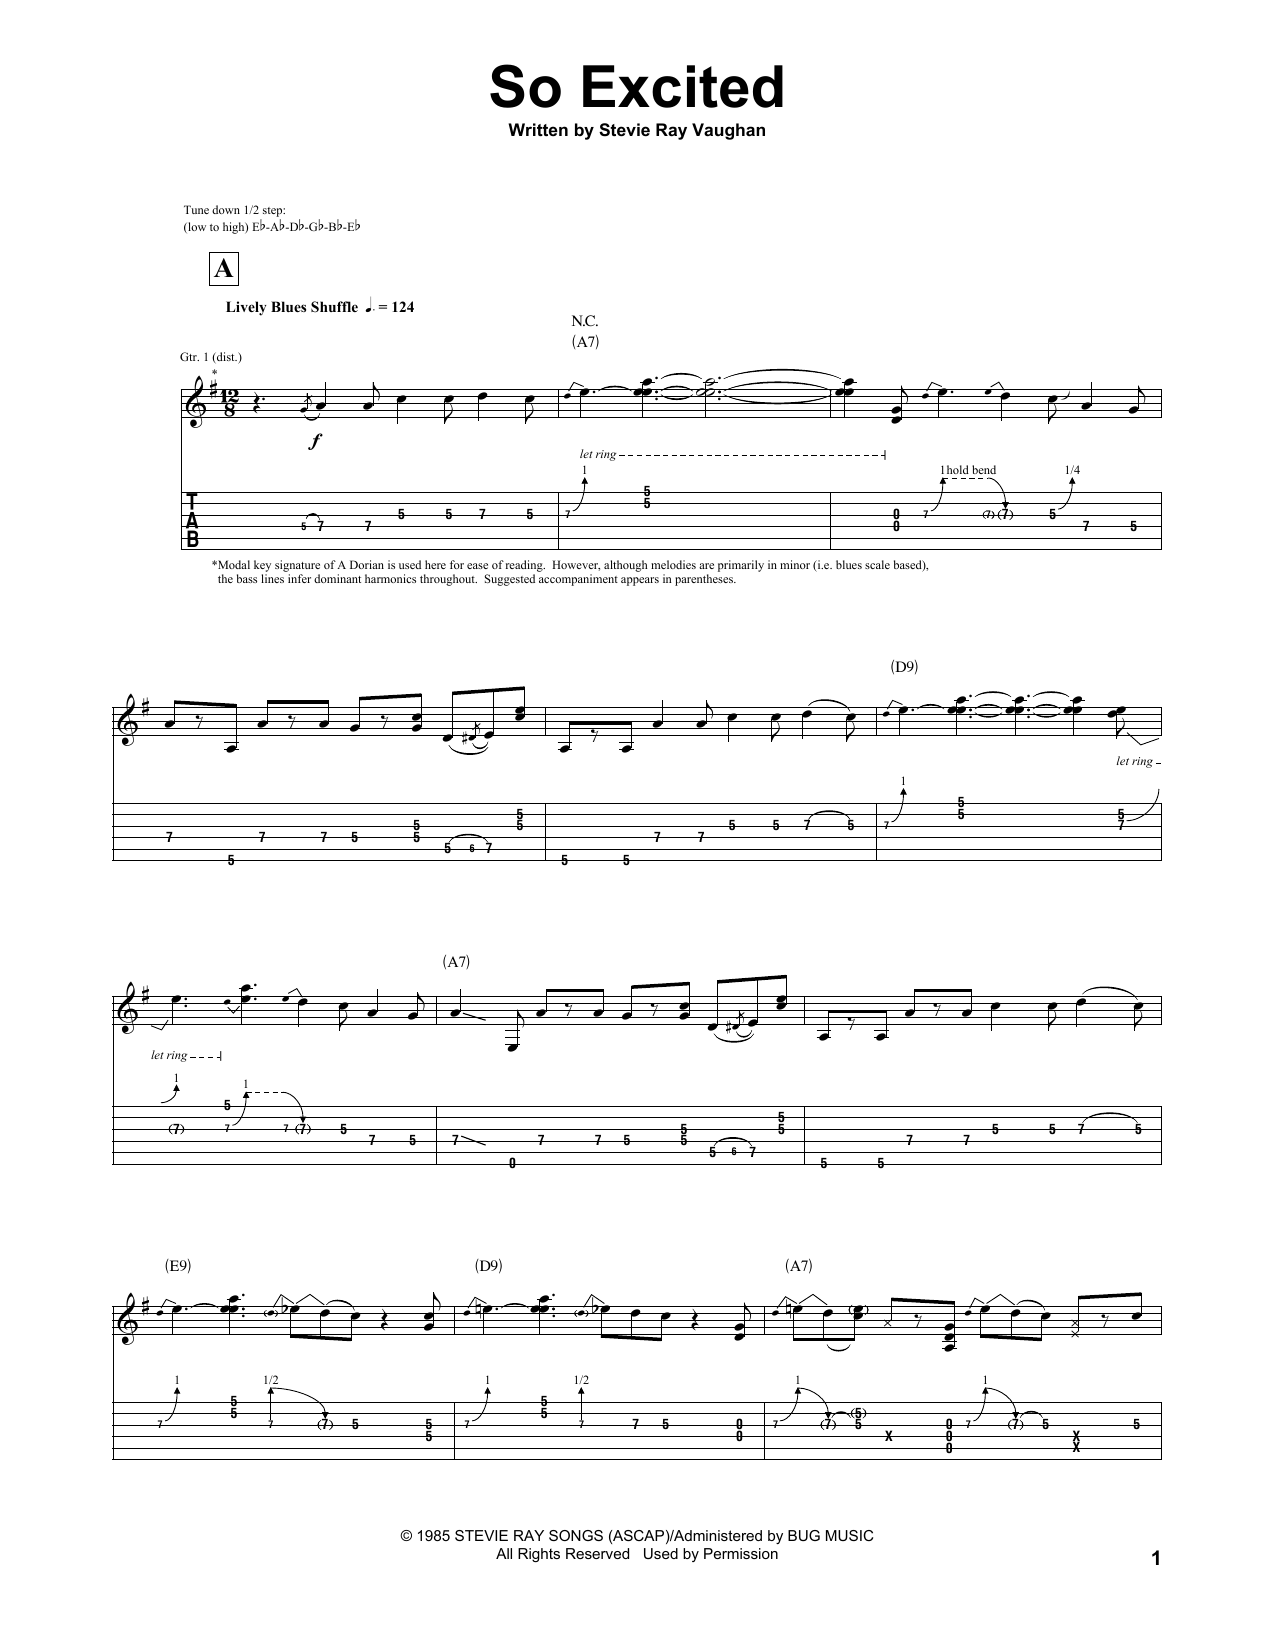 Download Stevie Ray Vaughan So Excited sheet music notes and chords for Guitar Tab - Download Printable PDF and start playing in minutes.